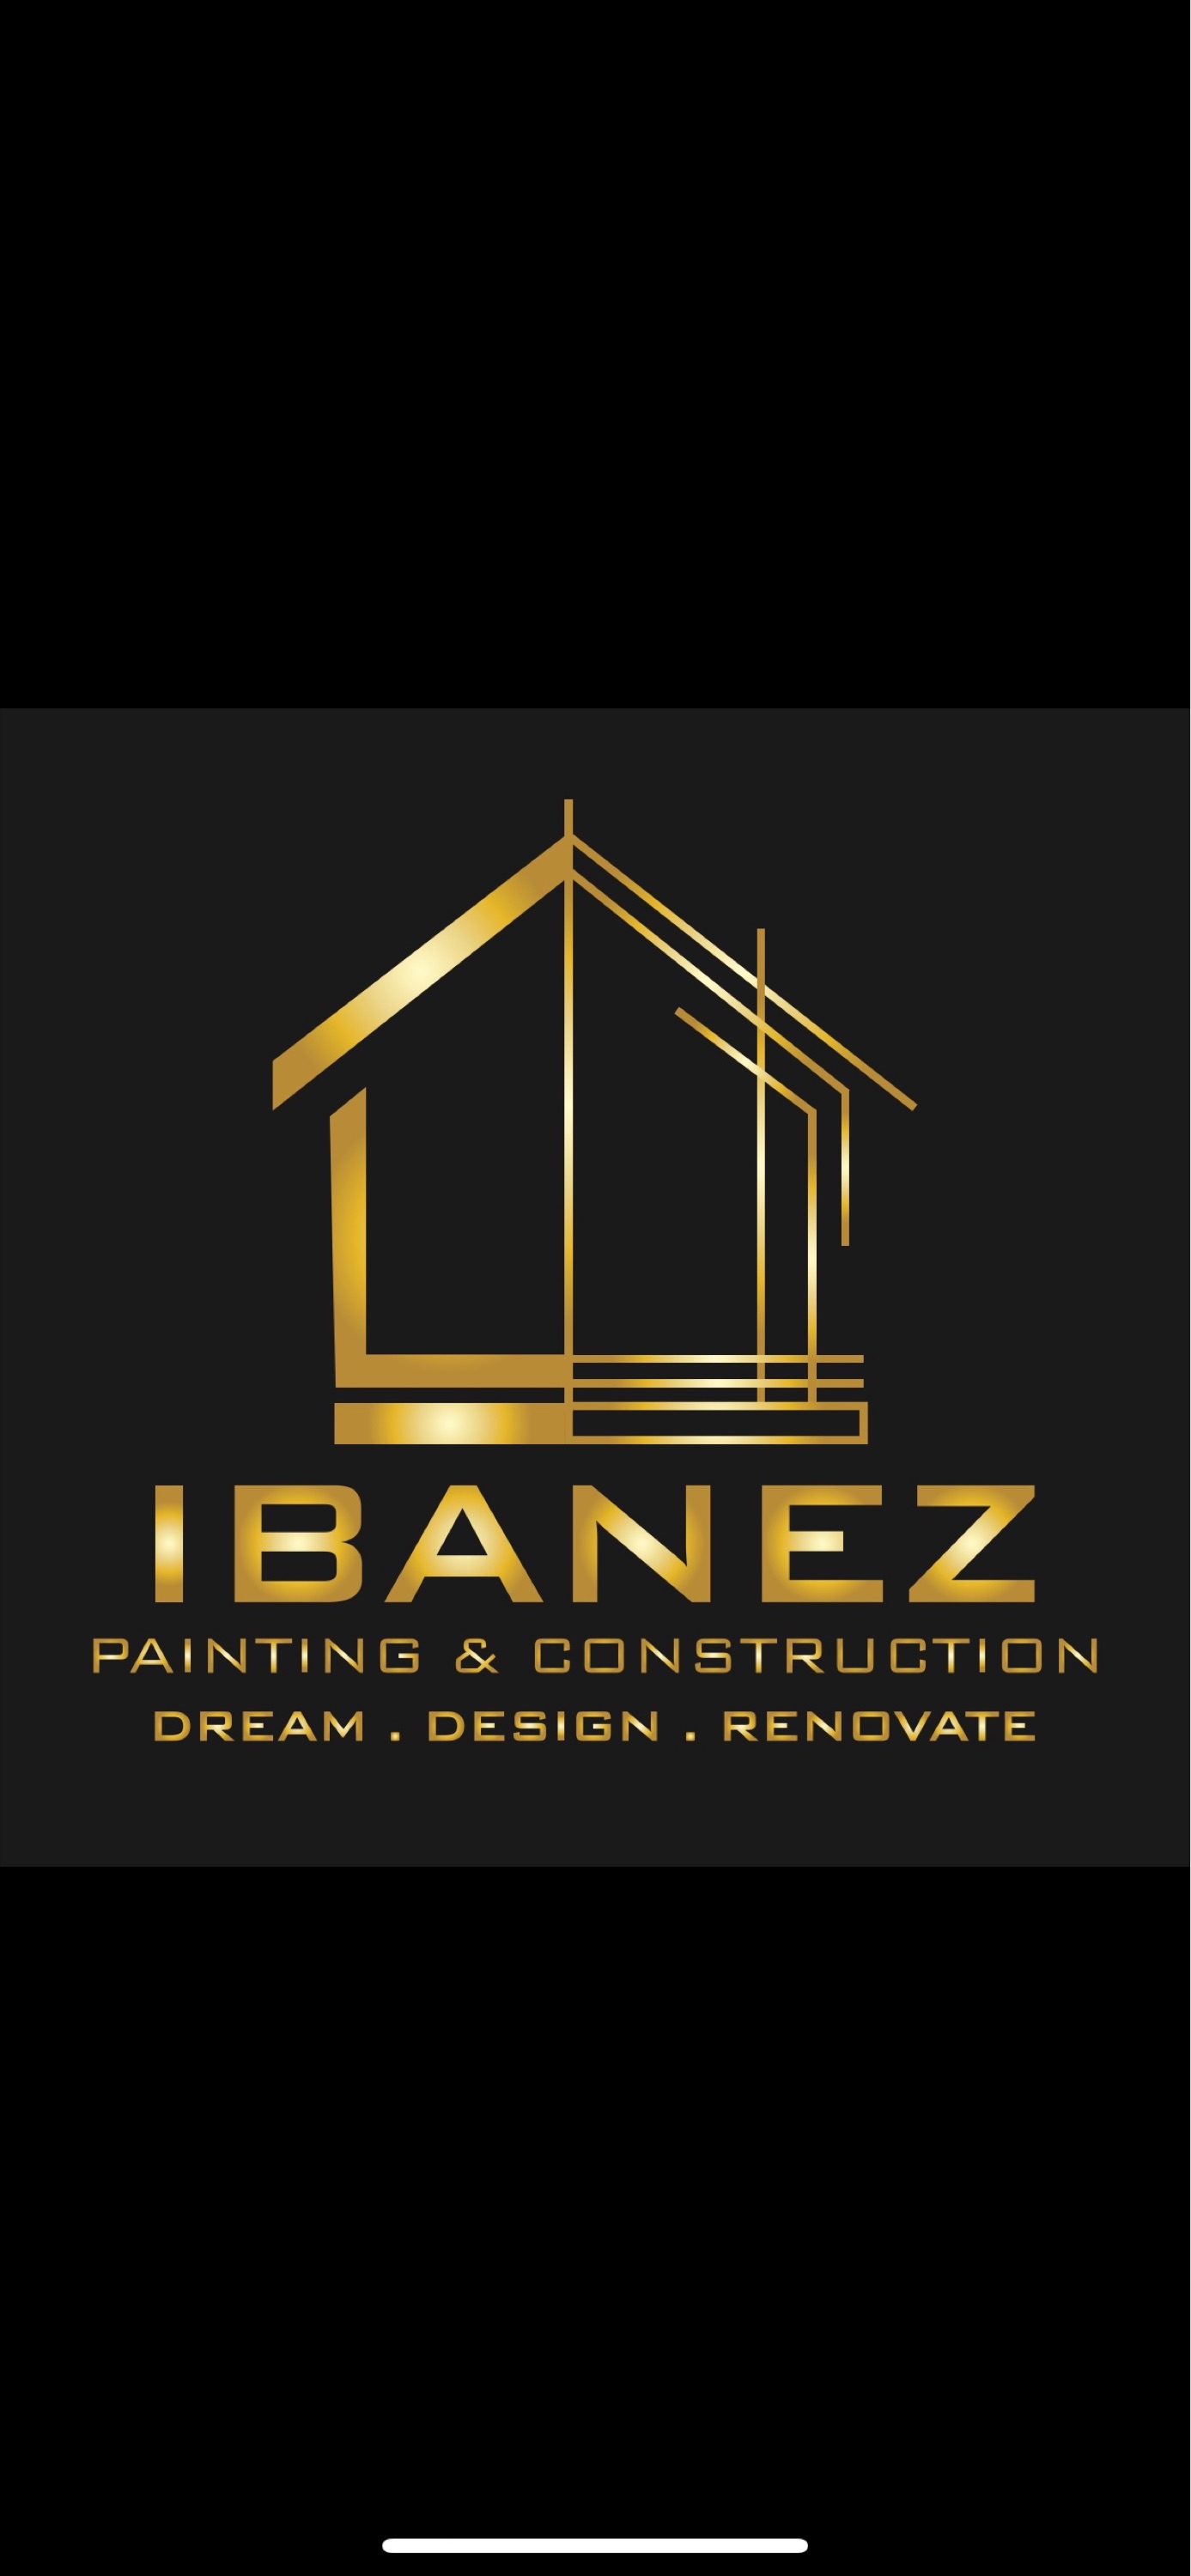 Ibanez Painting and Construction Logo